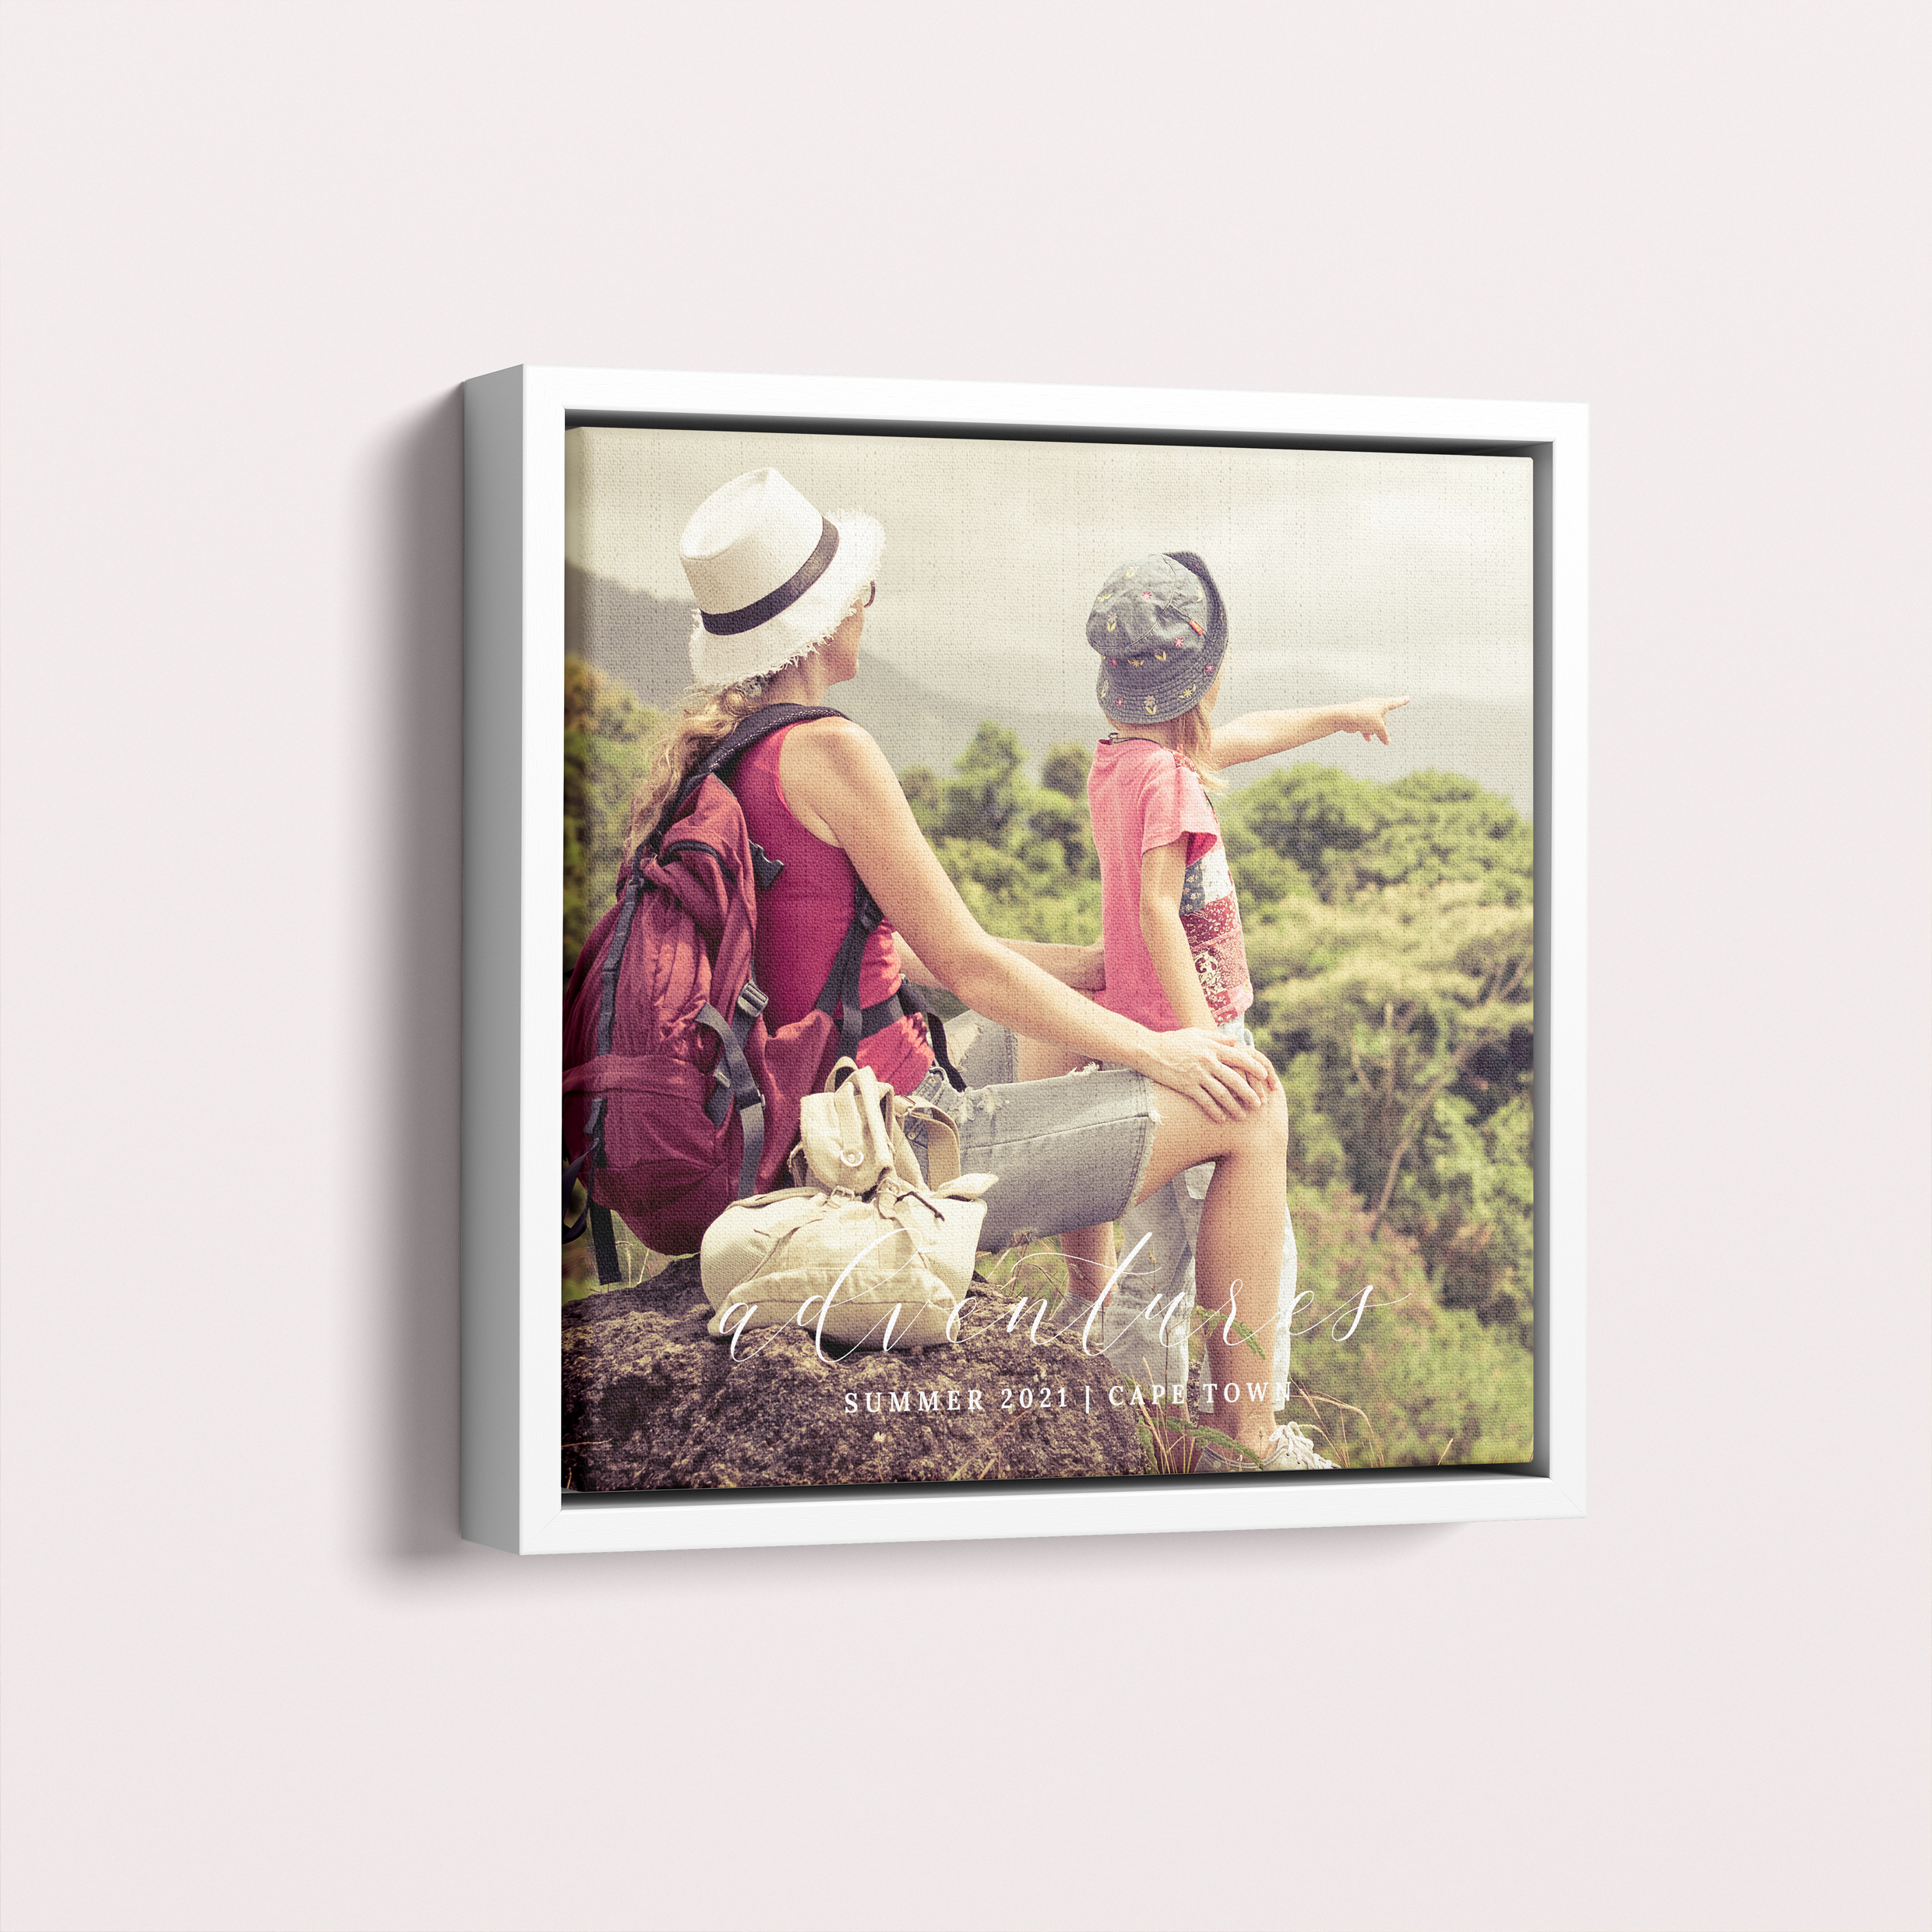  Personalized Adventures Framed Photo Canvas - Capture the essence of your unforgettable adventures with this portrait-oriented canvas designed to showcase favorite memories.